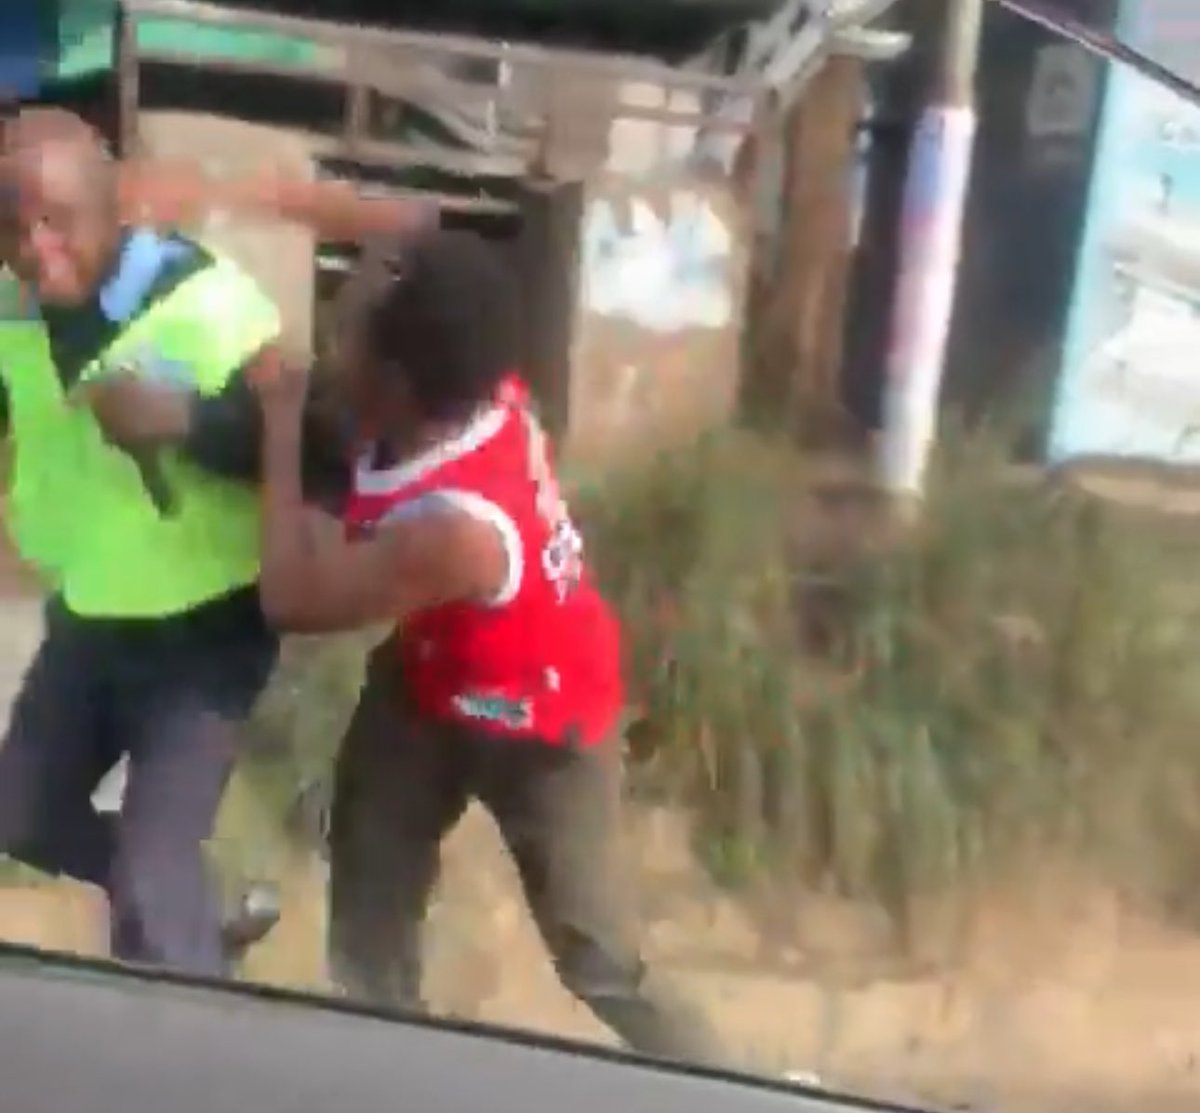 Man captured on camera assaulting a police officer. Watch👇